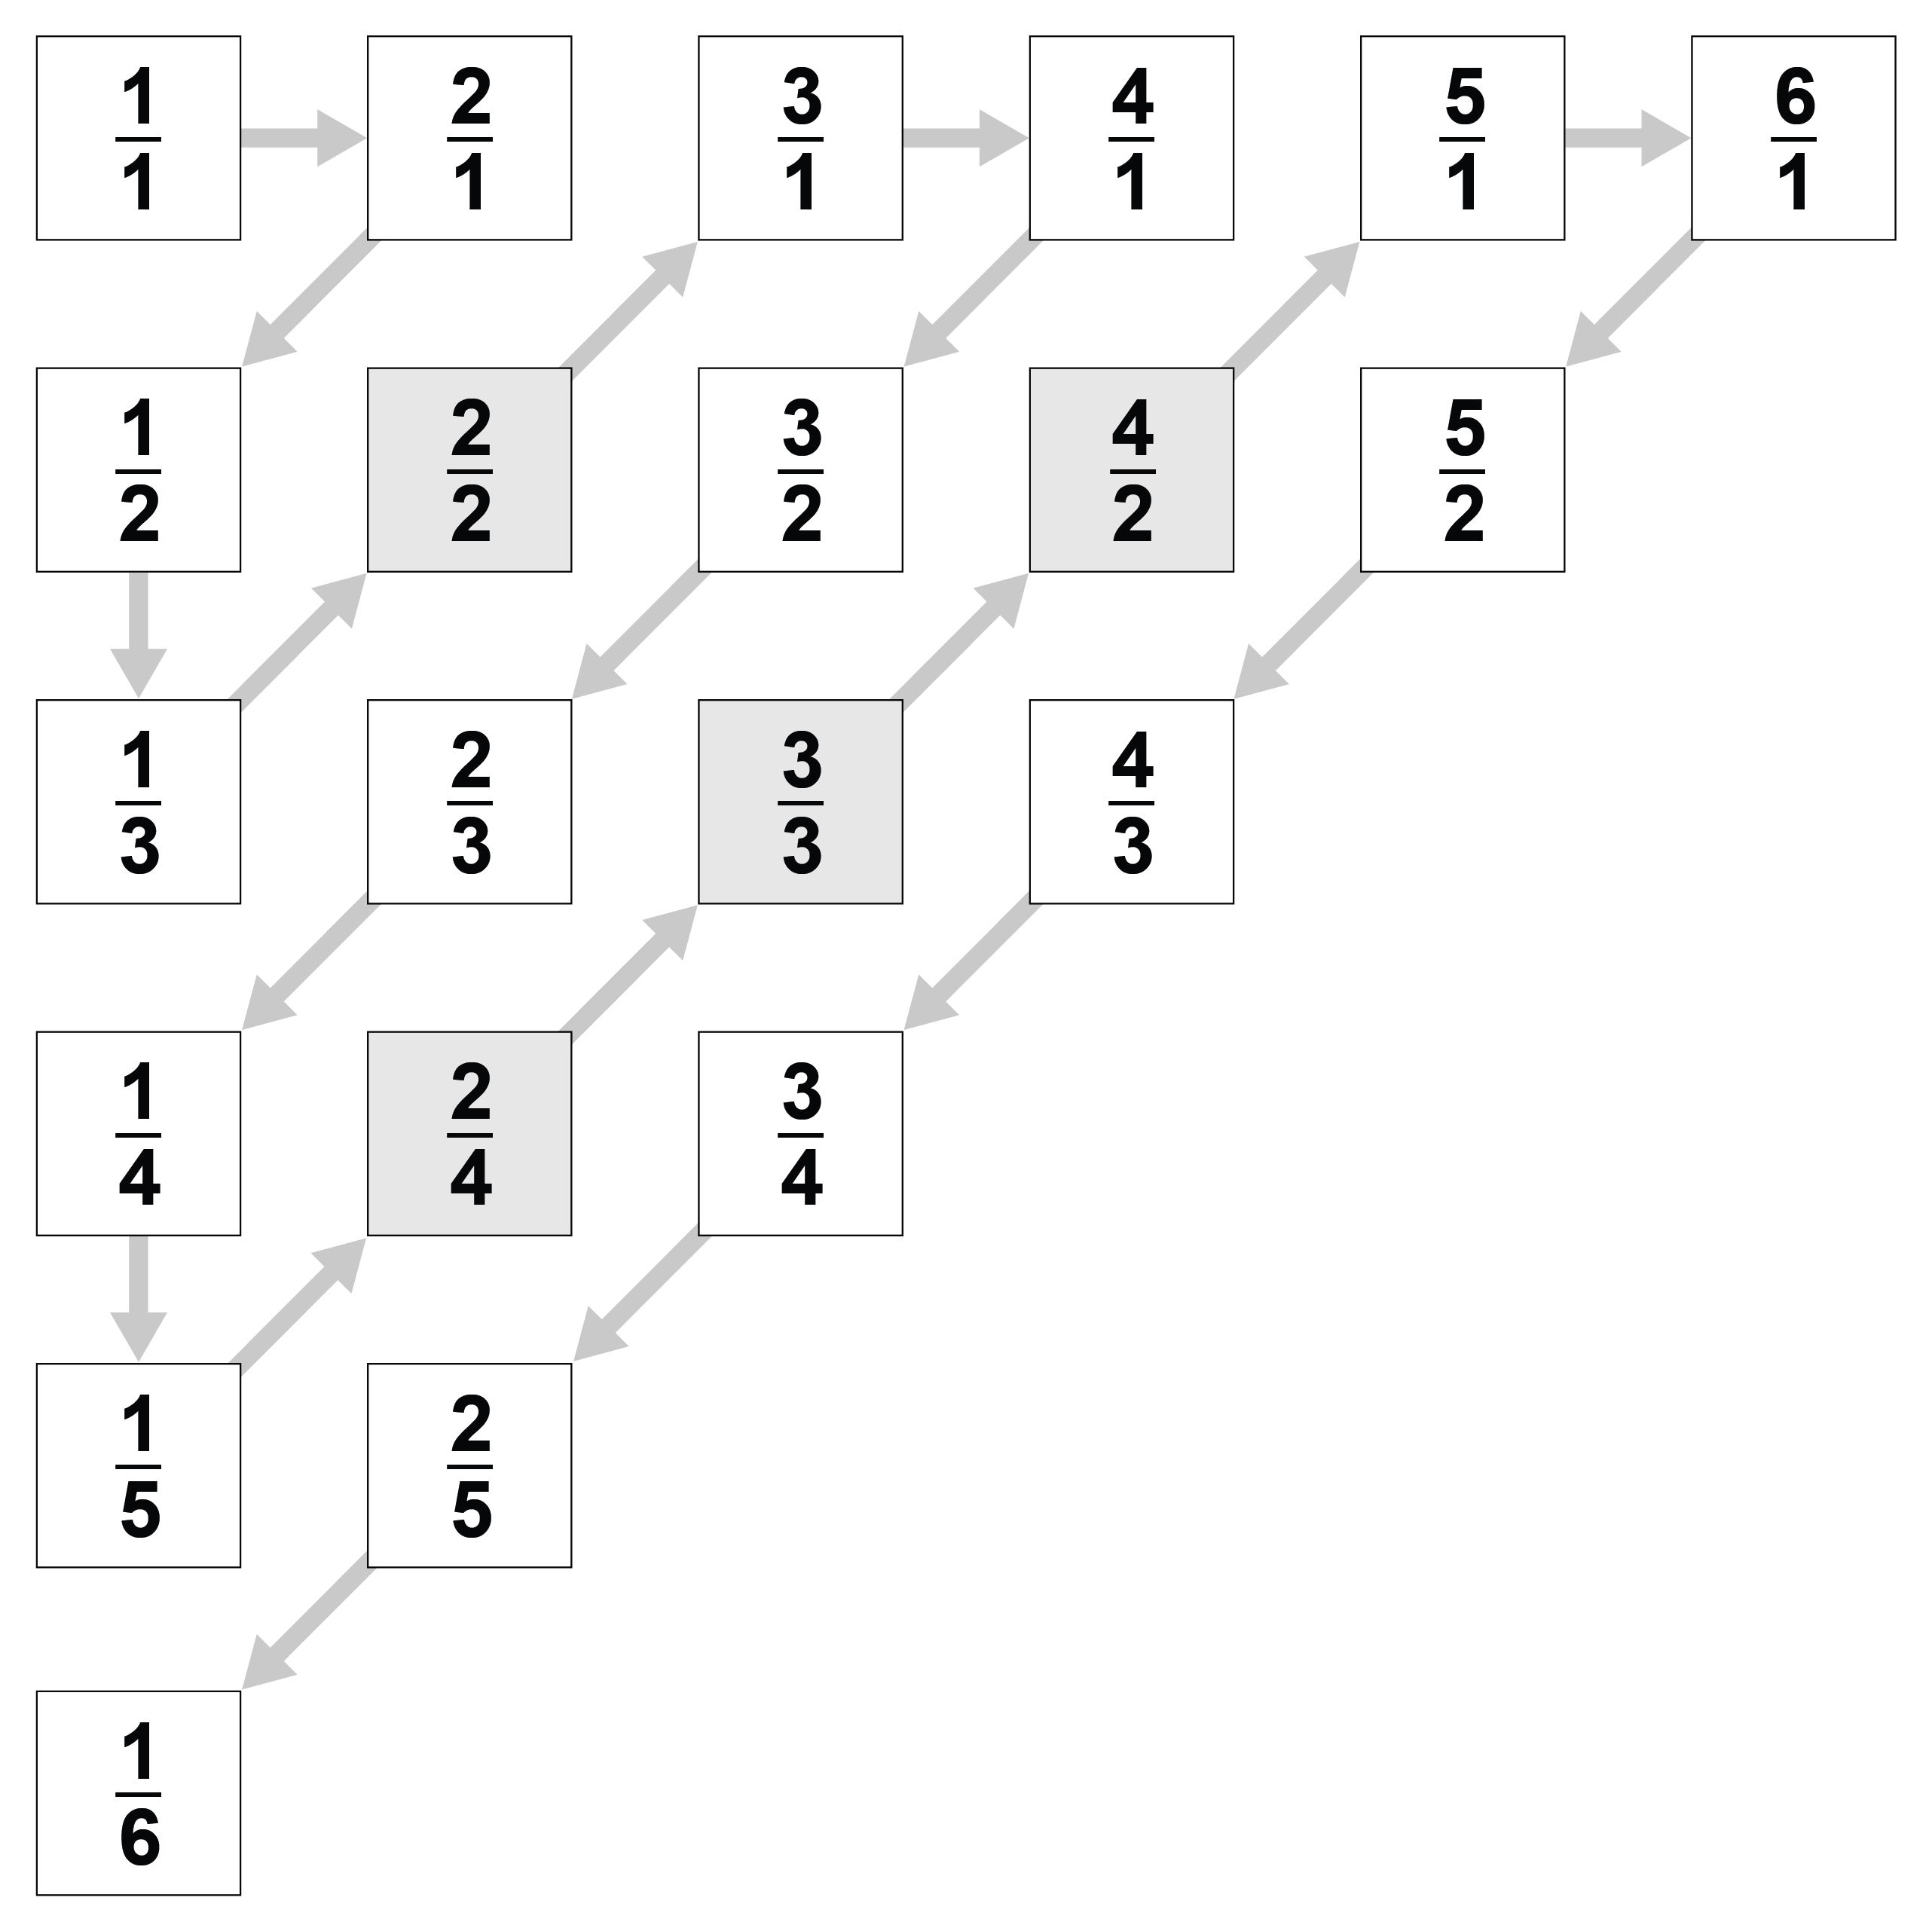 Rows and columns of fractions with arrows between them